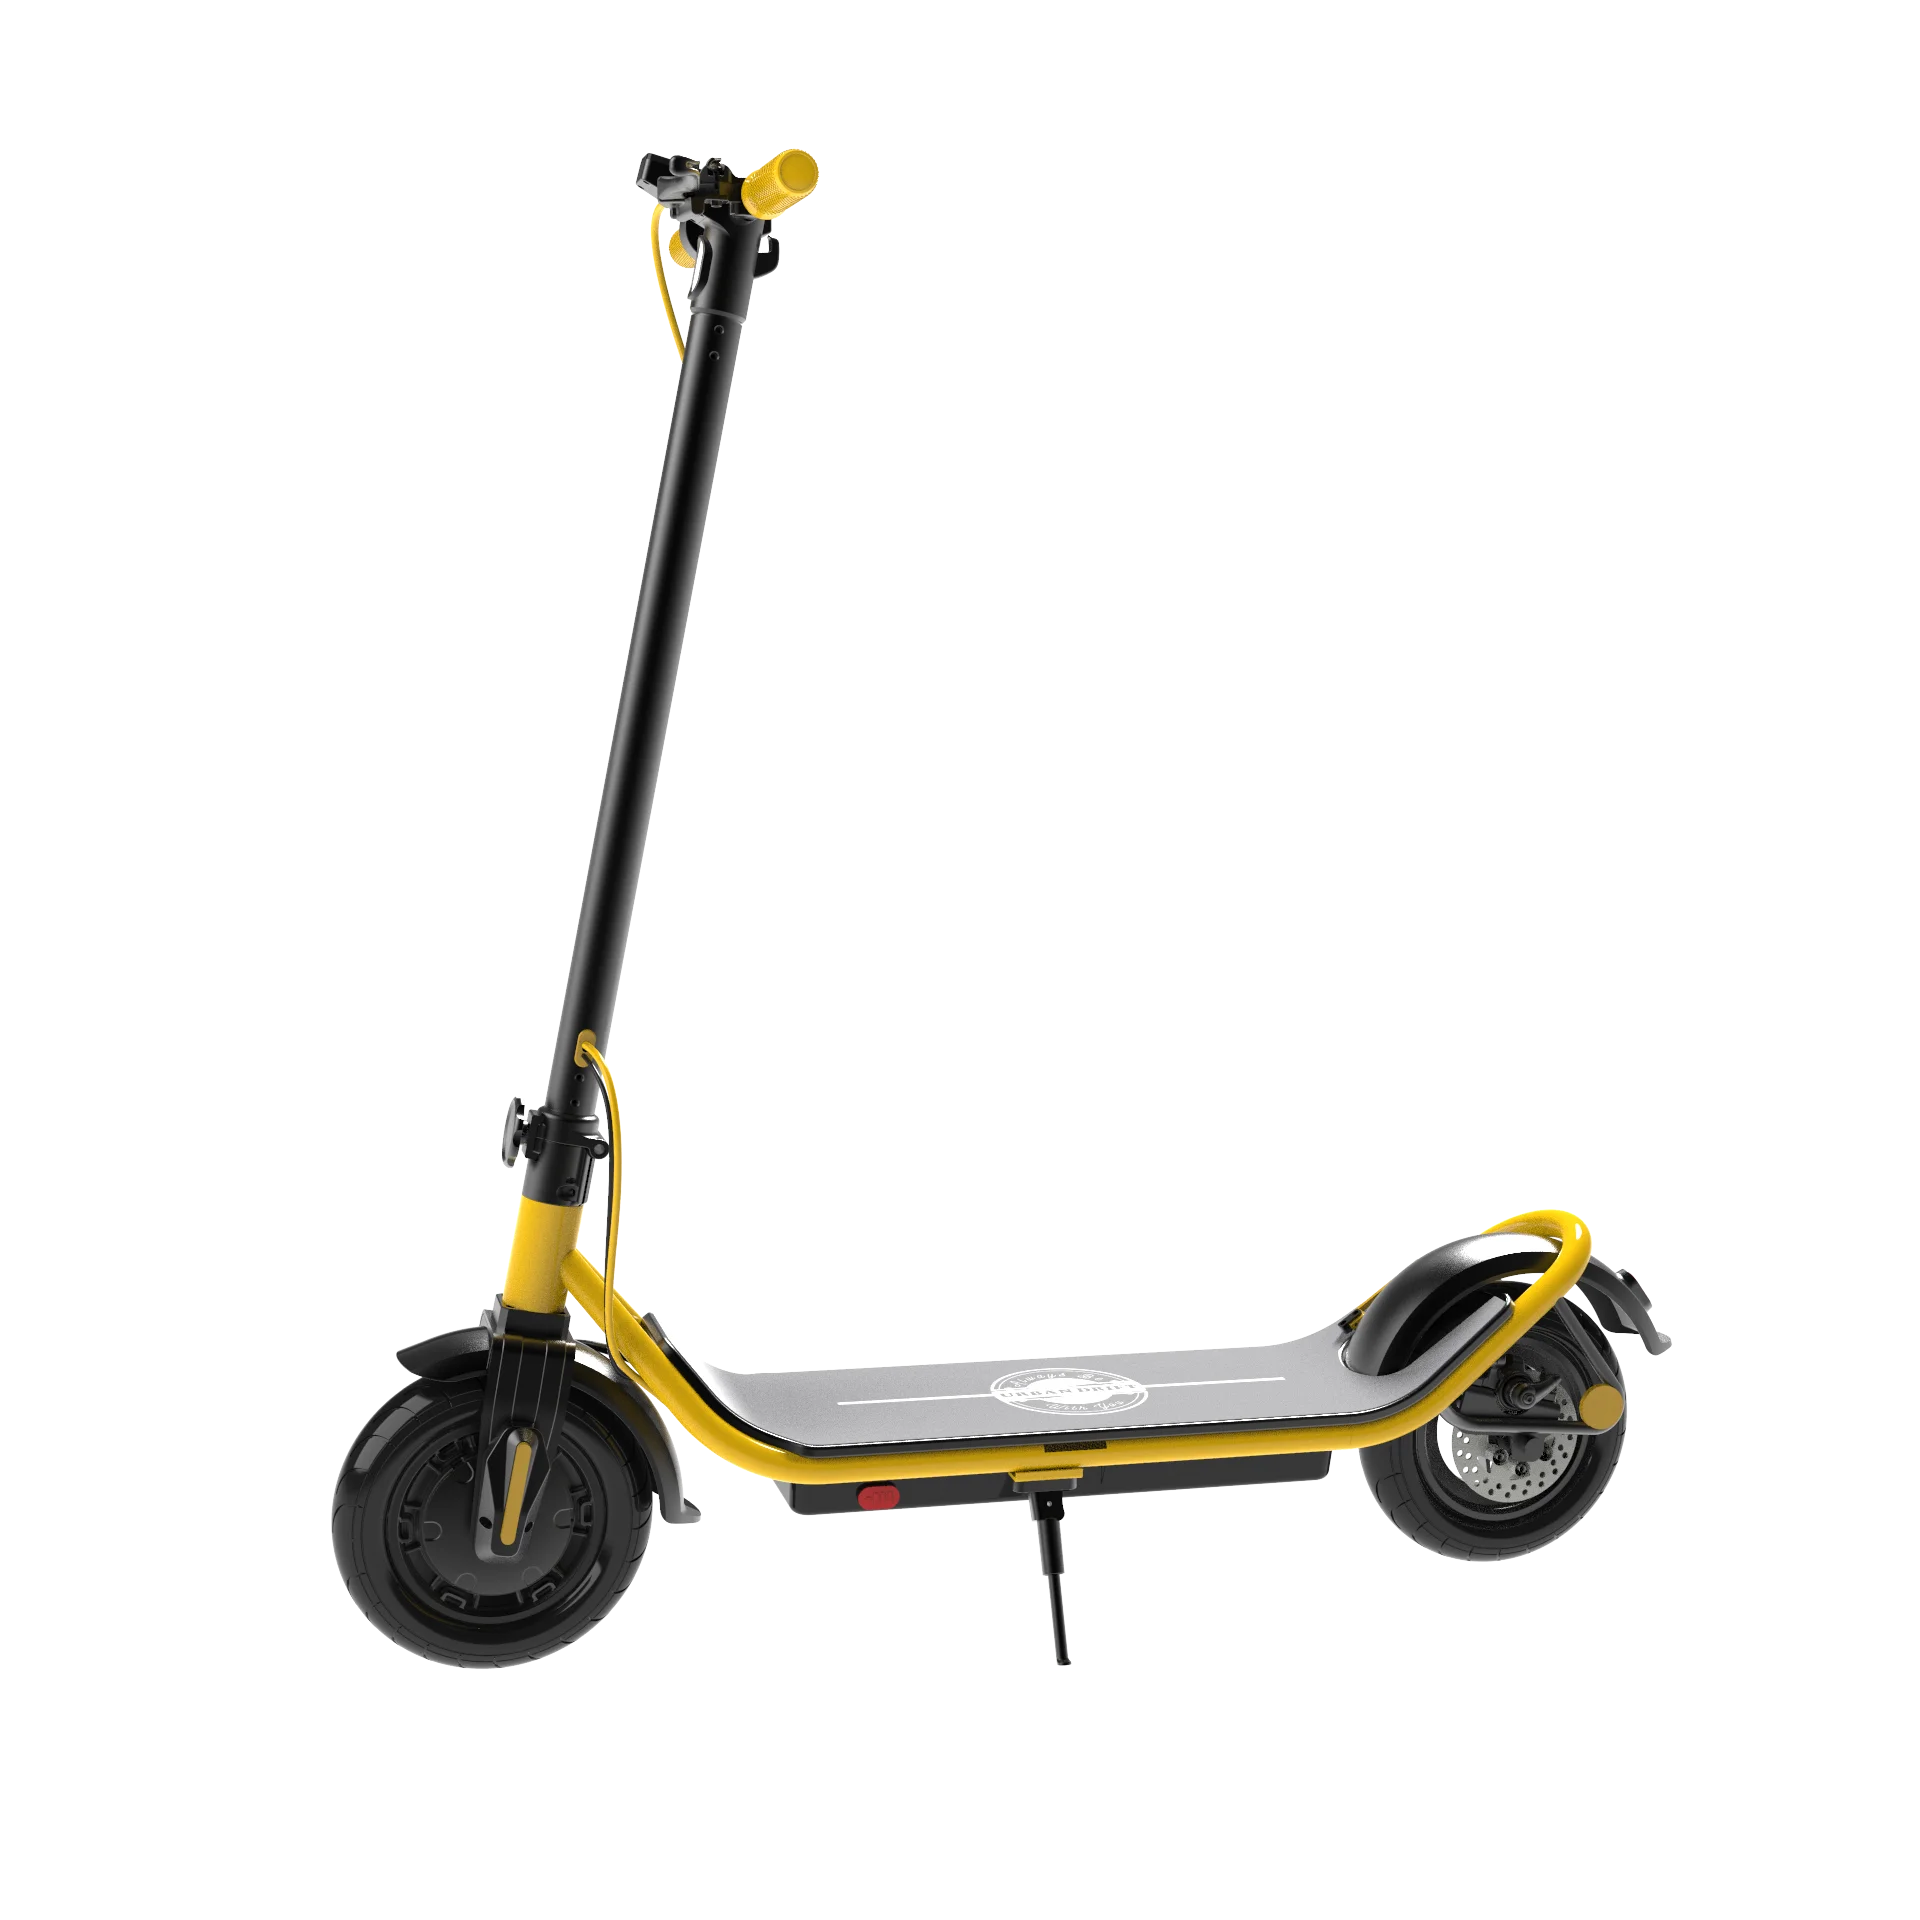 

hot US EU Stock free shipping Original private model urban drift S006 10inch 350W 10.4ah big tires professional service scooters